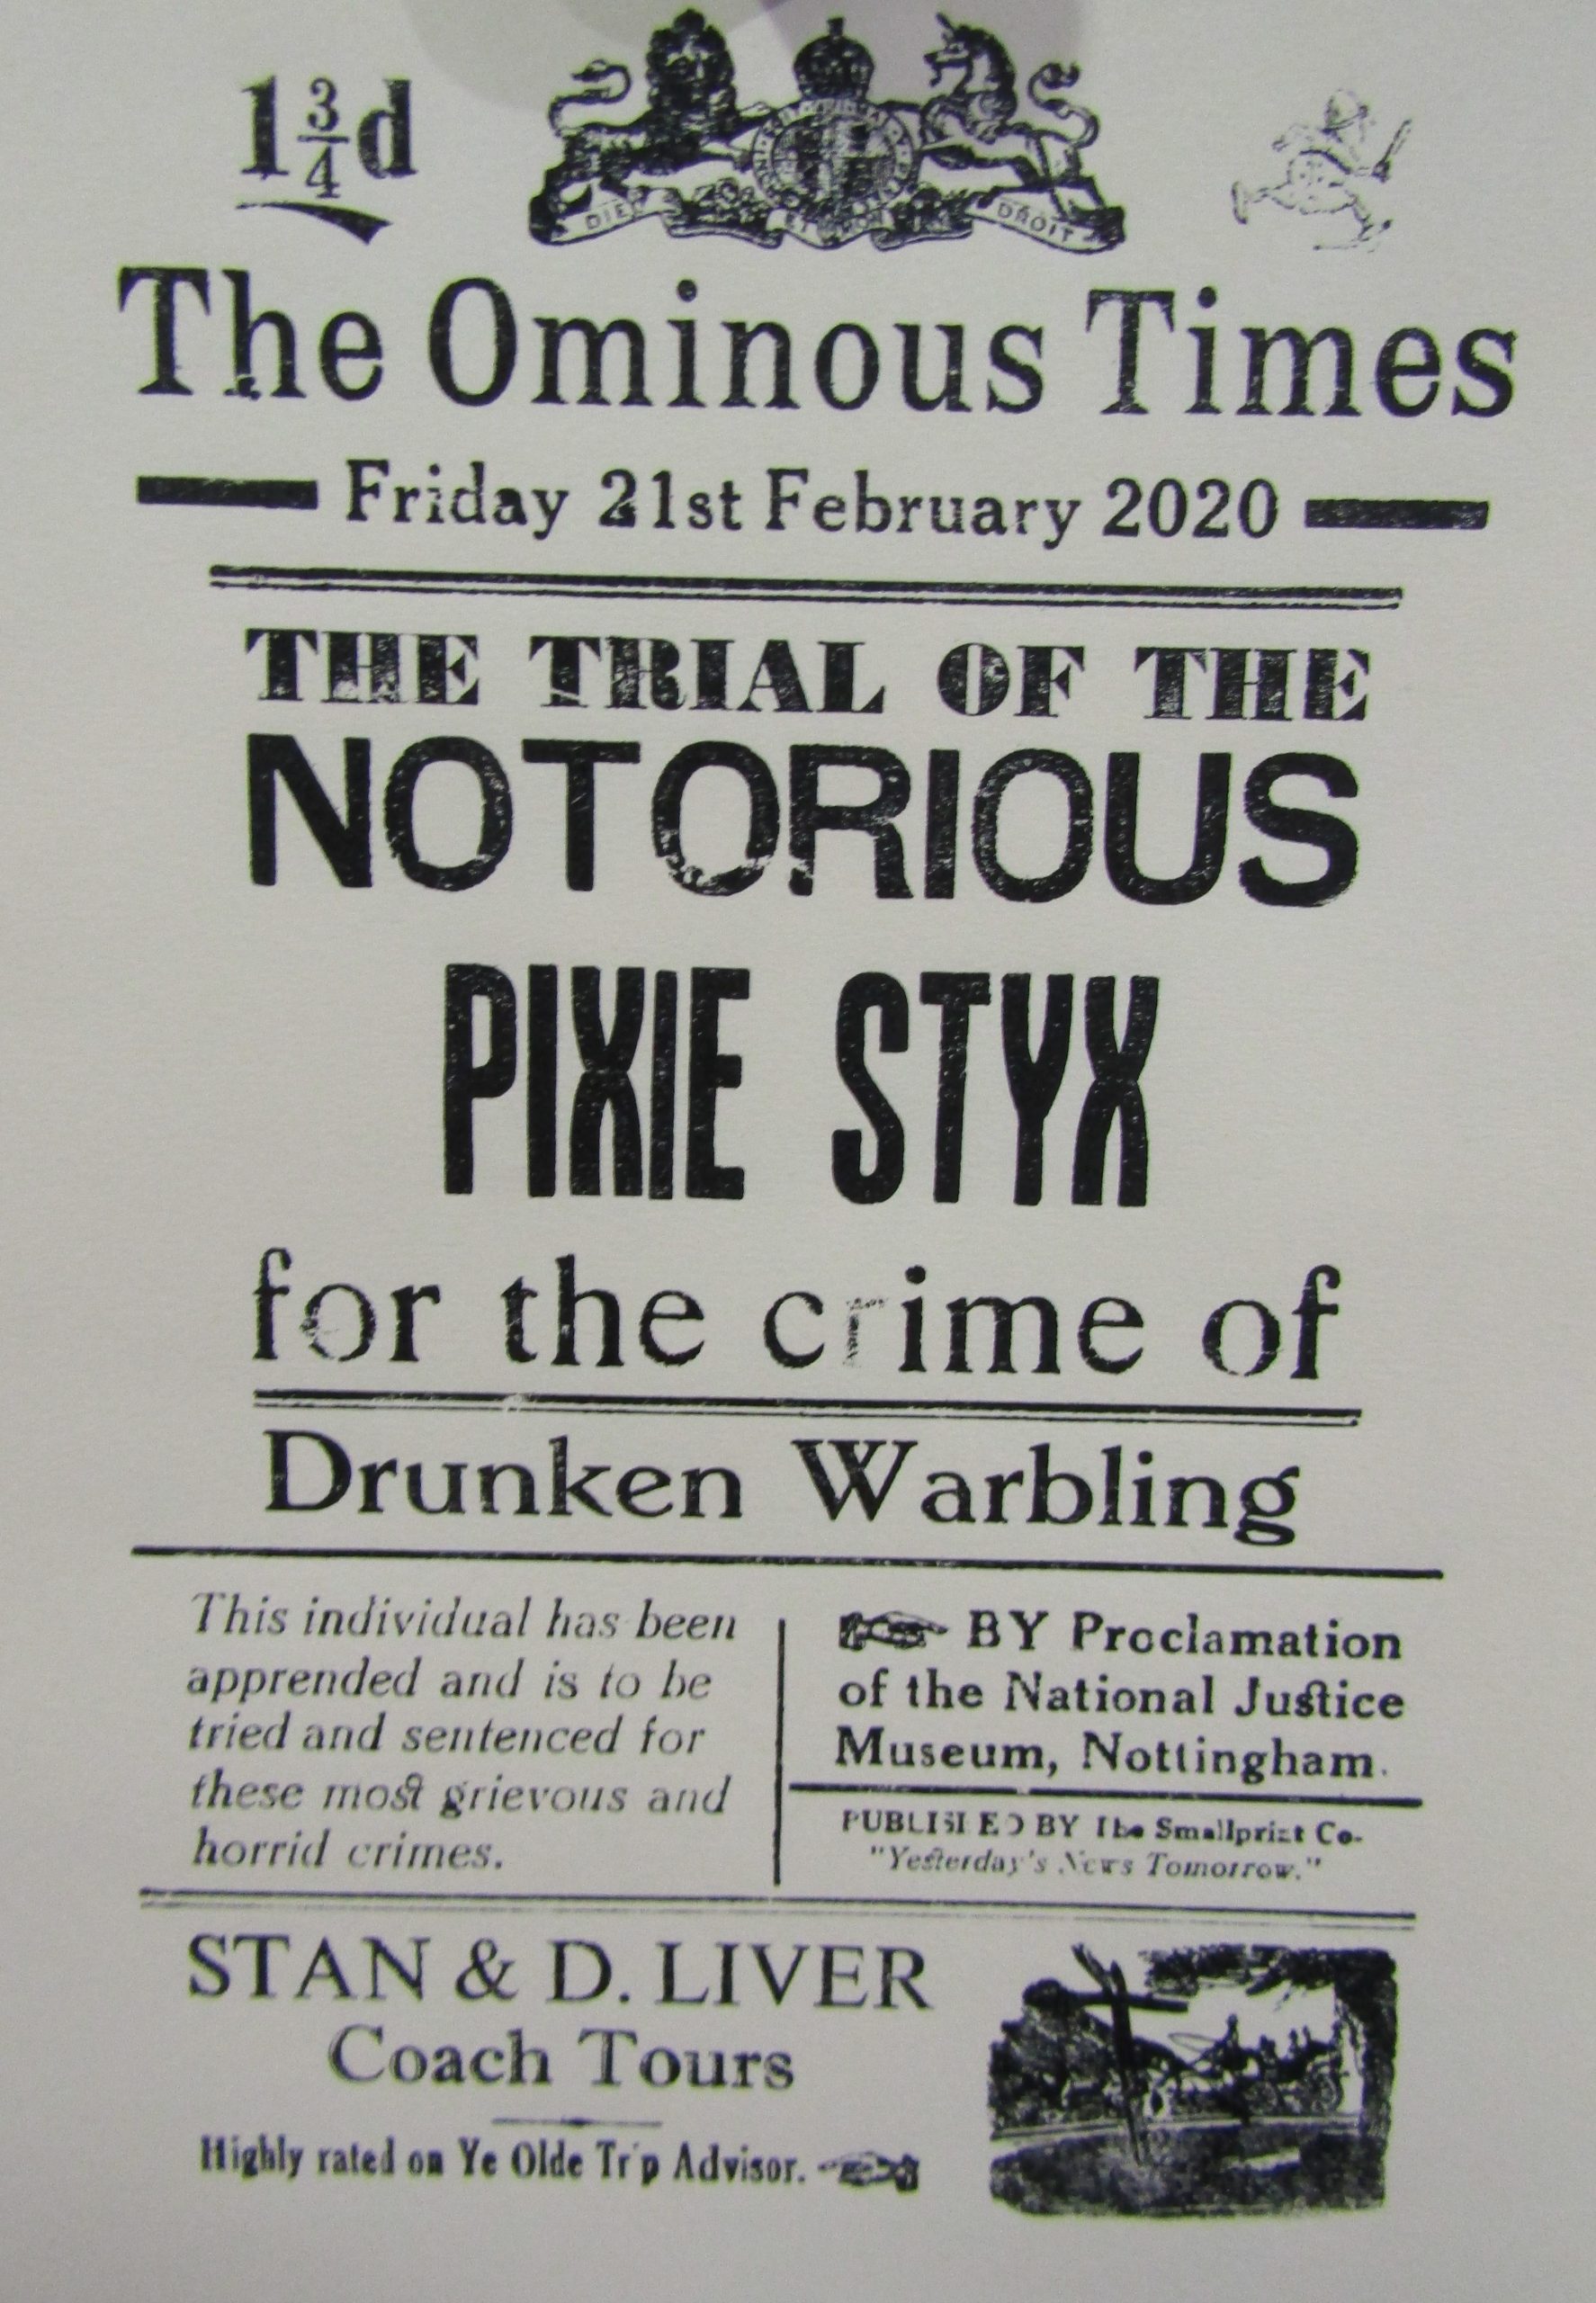 The Ominous Times: Pixie Styx